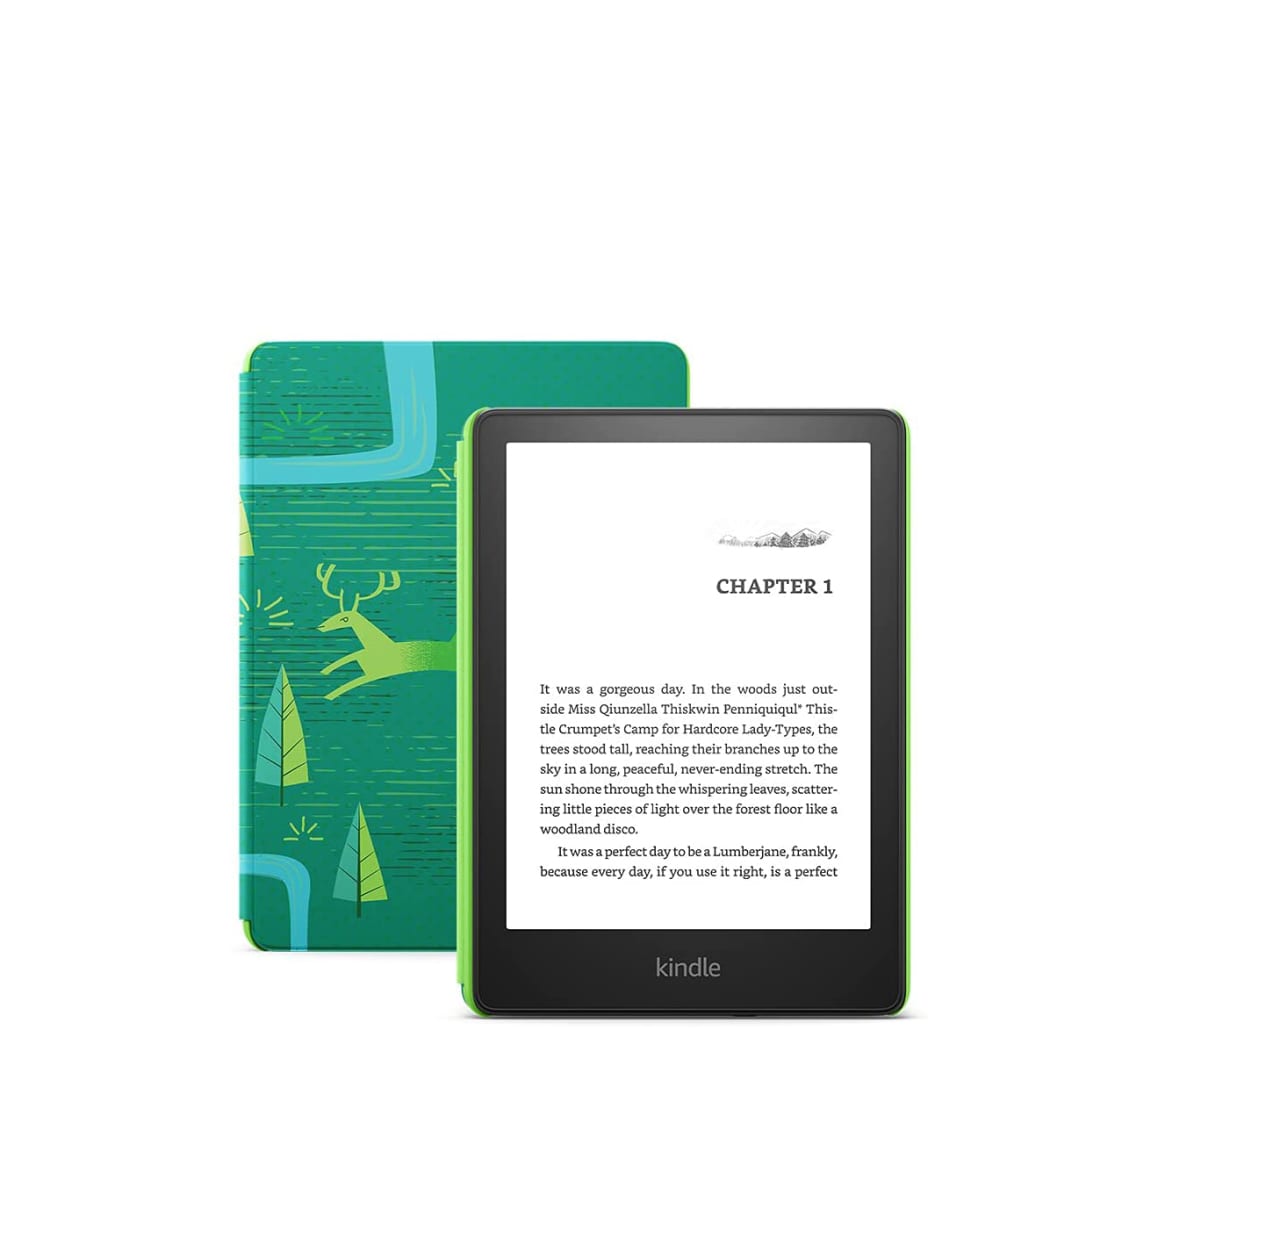 The E-Readers Amazon, Kobo and Other Platforms - Buy from WSJ